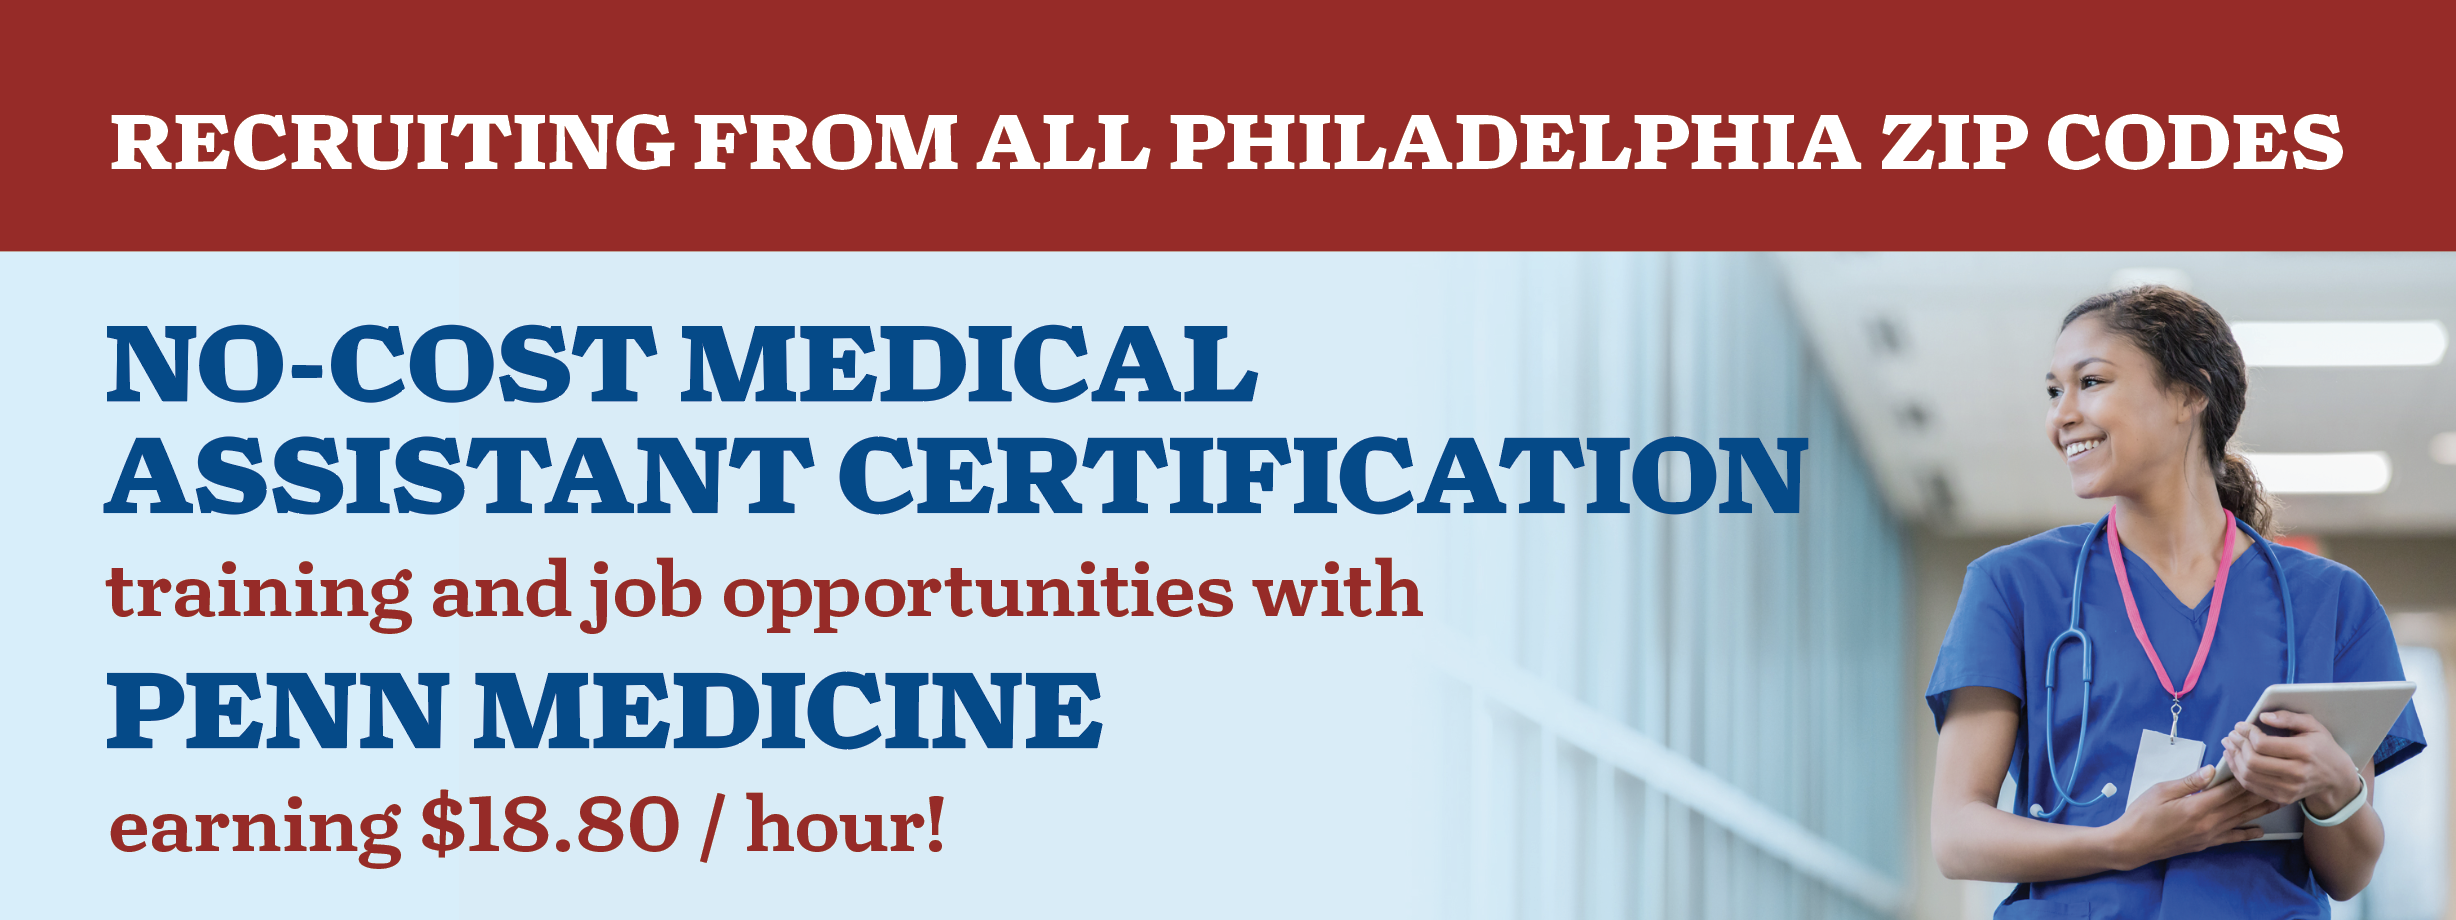 NO-COST MEDICAL ASSISTANT CERTIFICATION training and job opportunities with PENN MEDICINE earning $18.80 / hour!